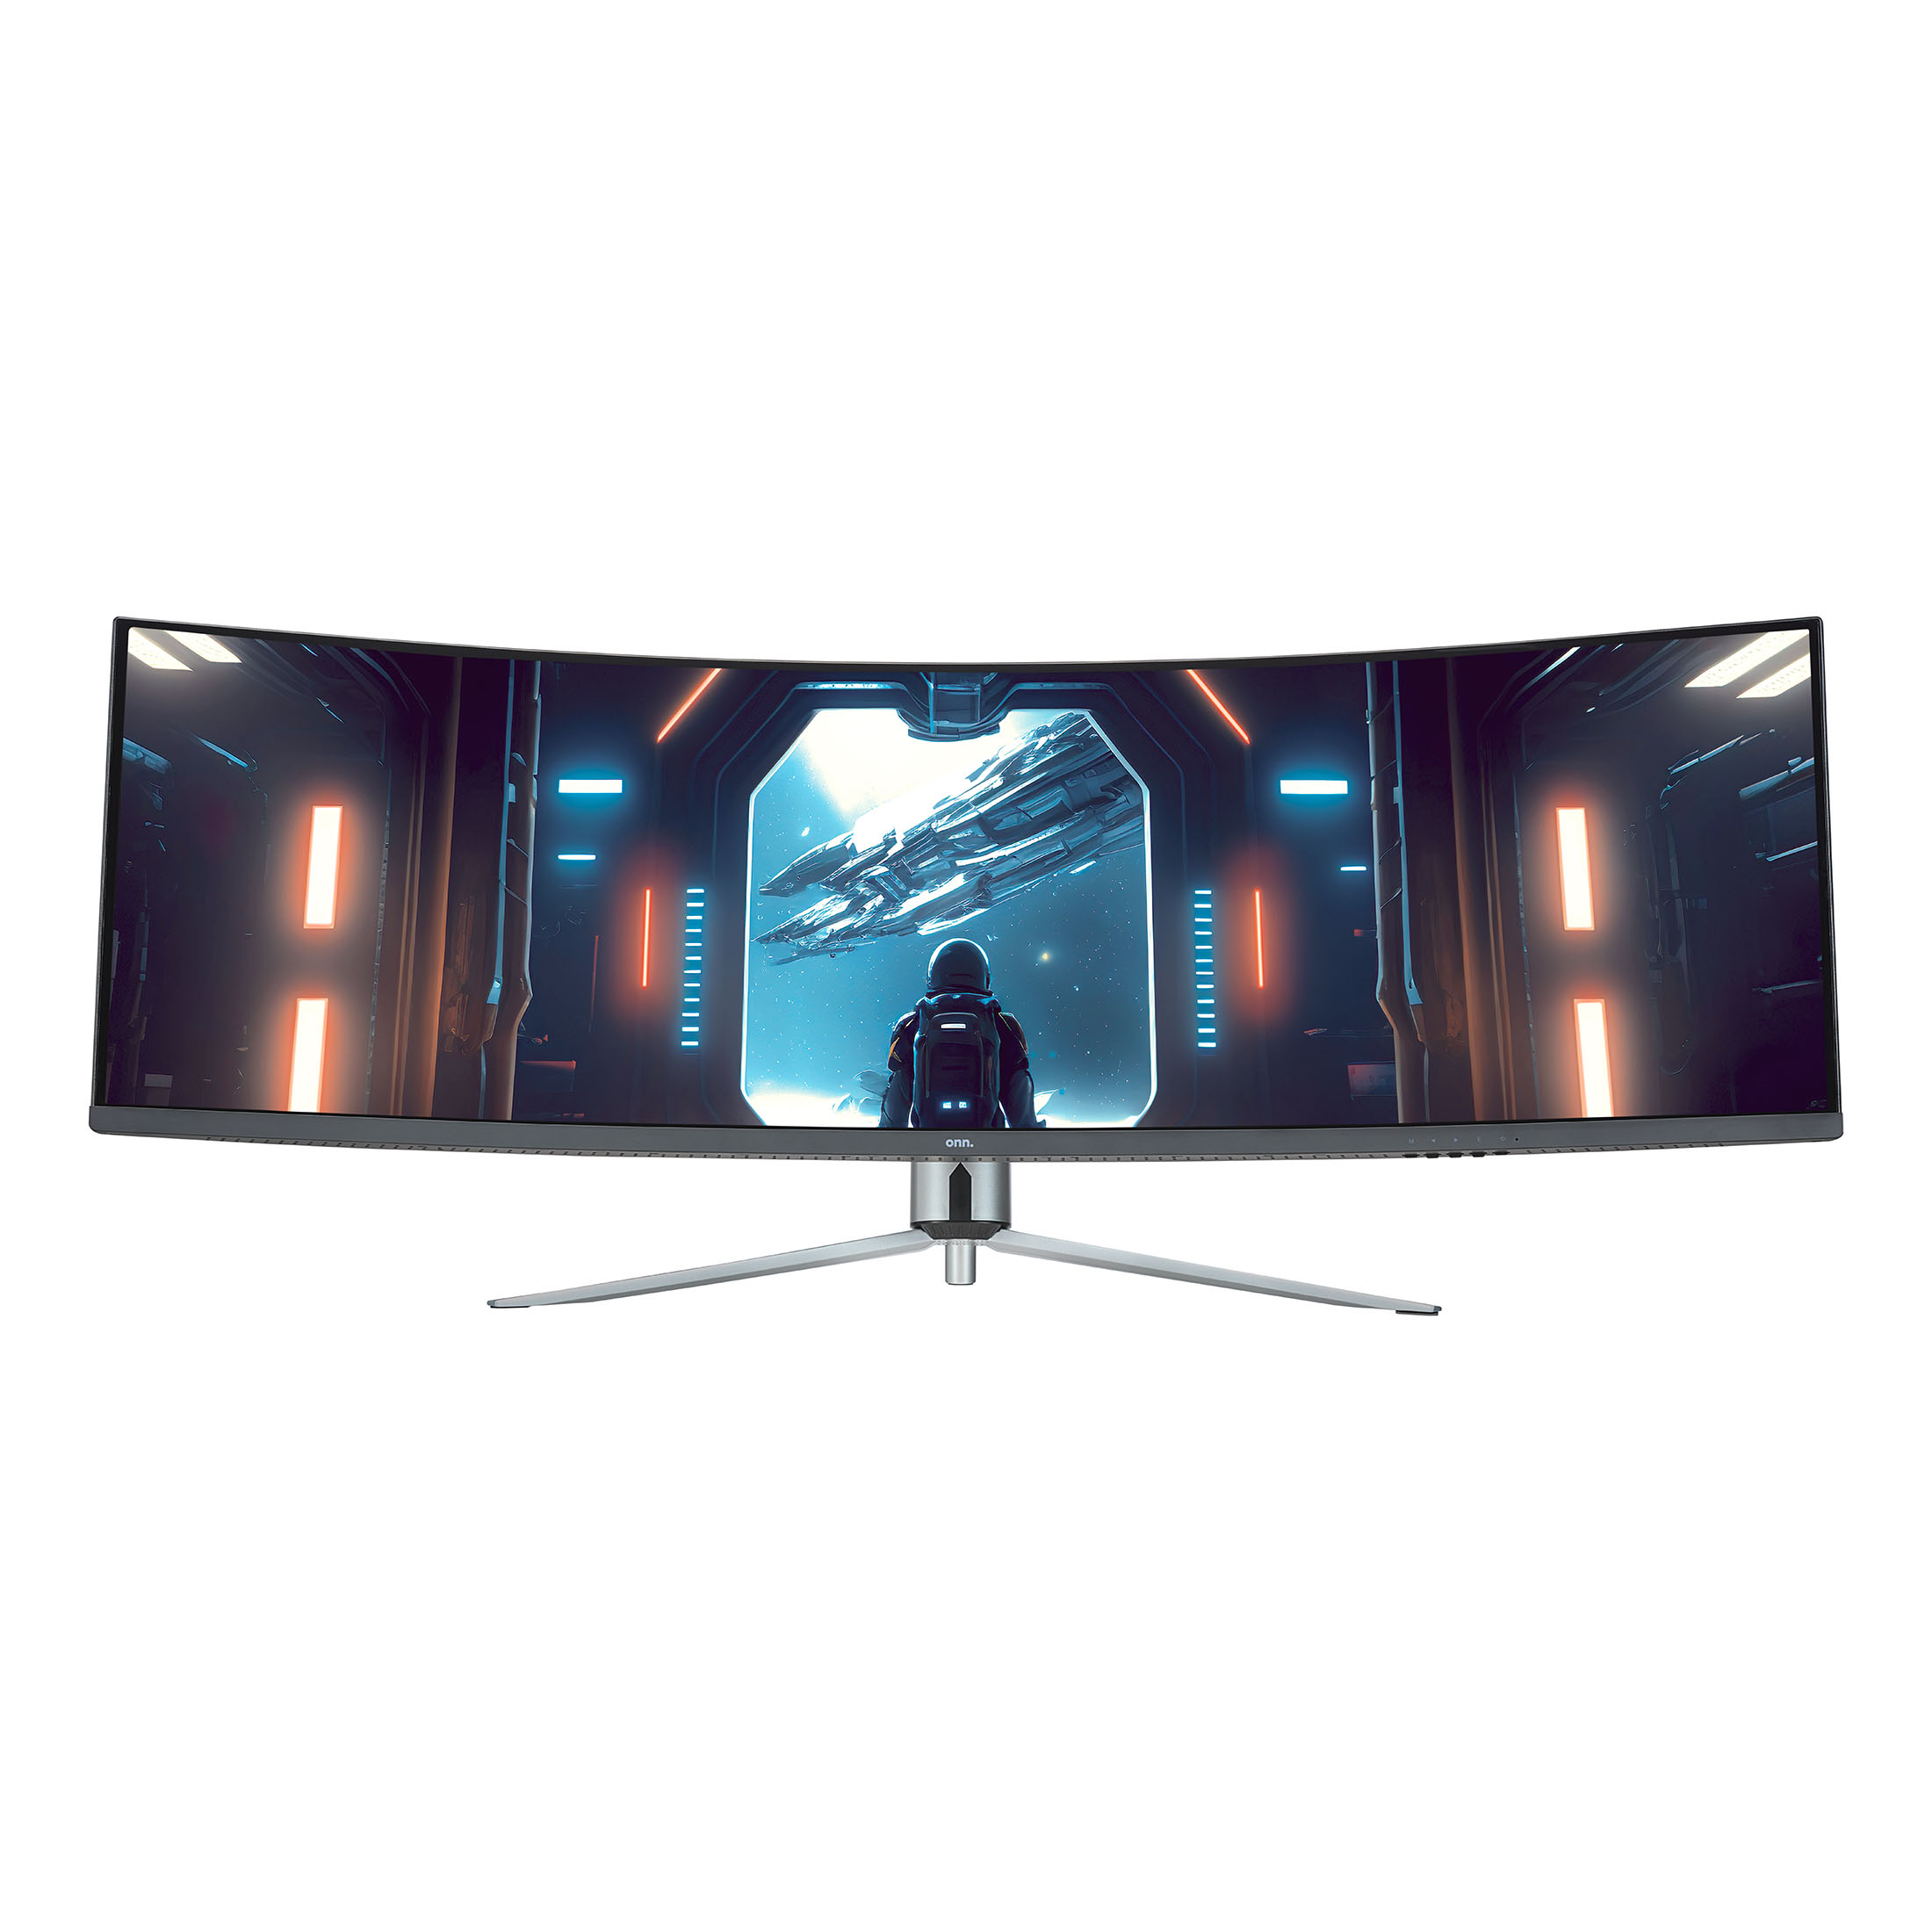 onn. 49" Curved Dual FHD (3840 x 1080p) 144Hz 1ms Gaming Monitor with Cables, Black, New - image 1 of 8